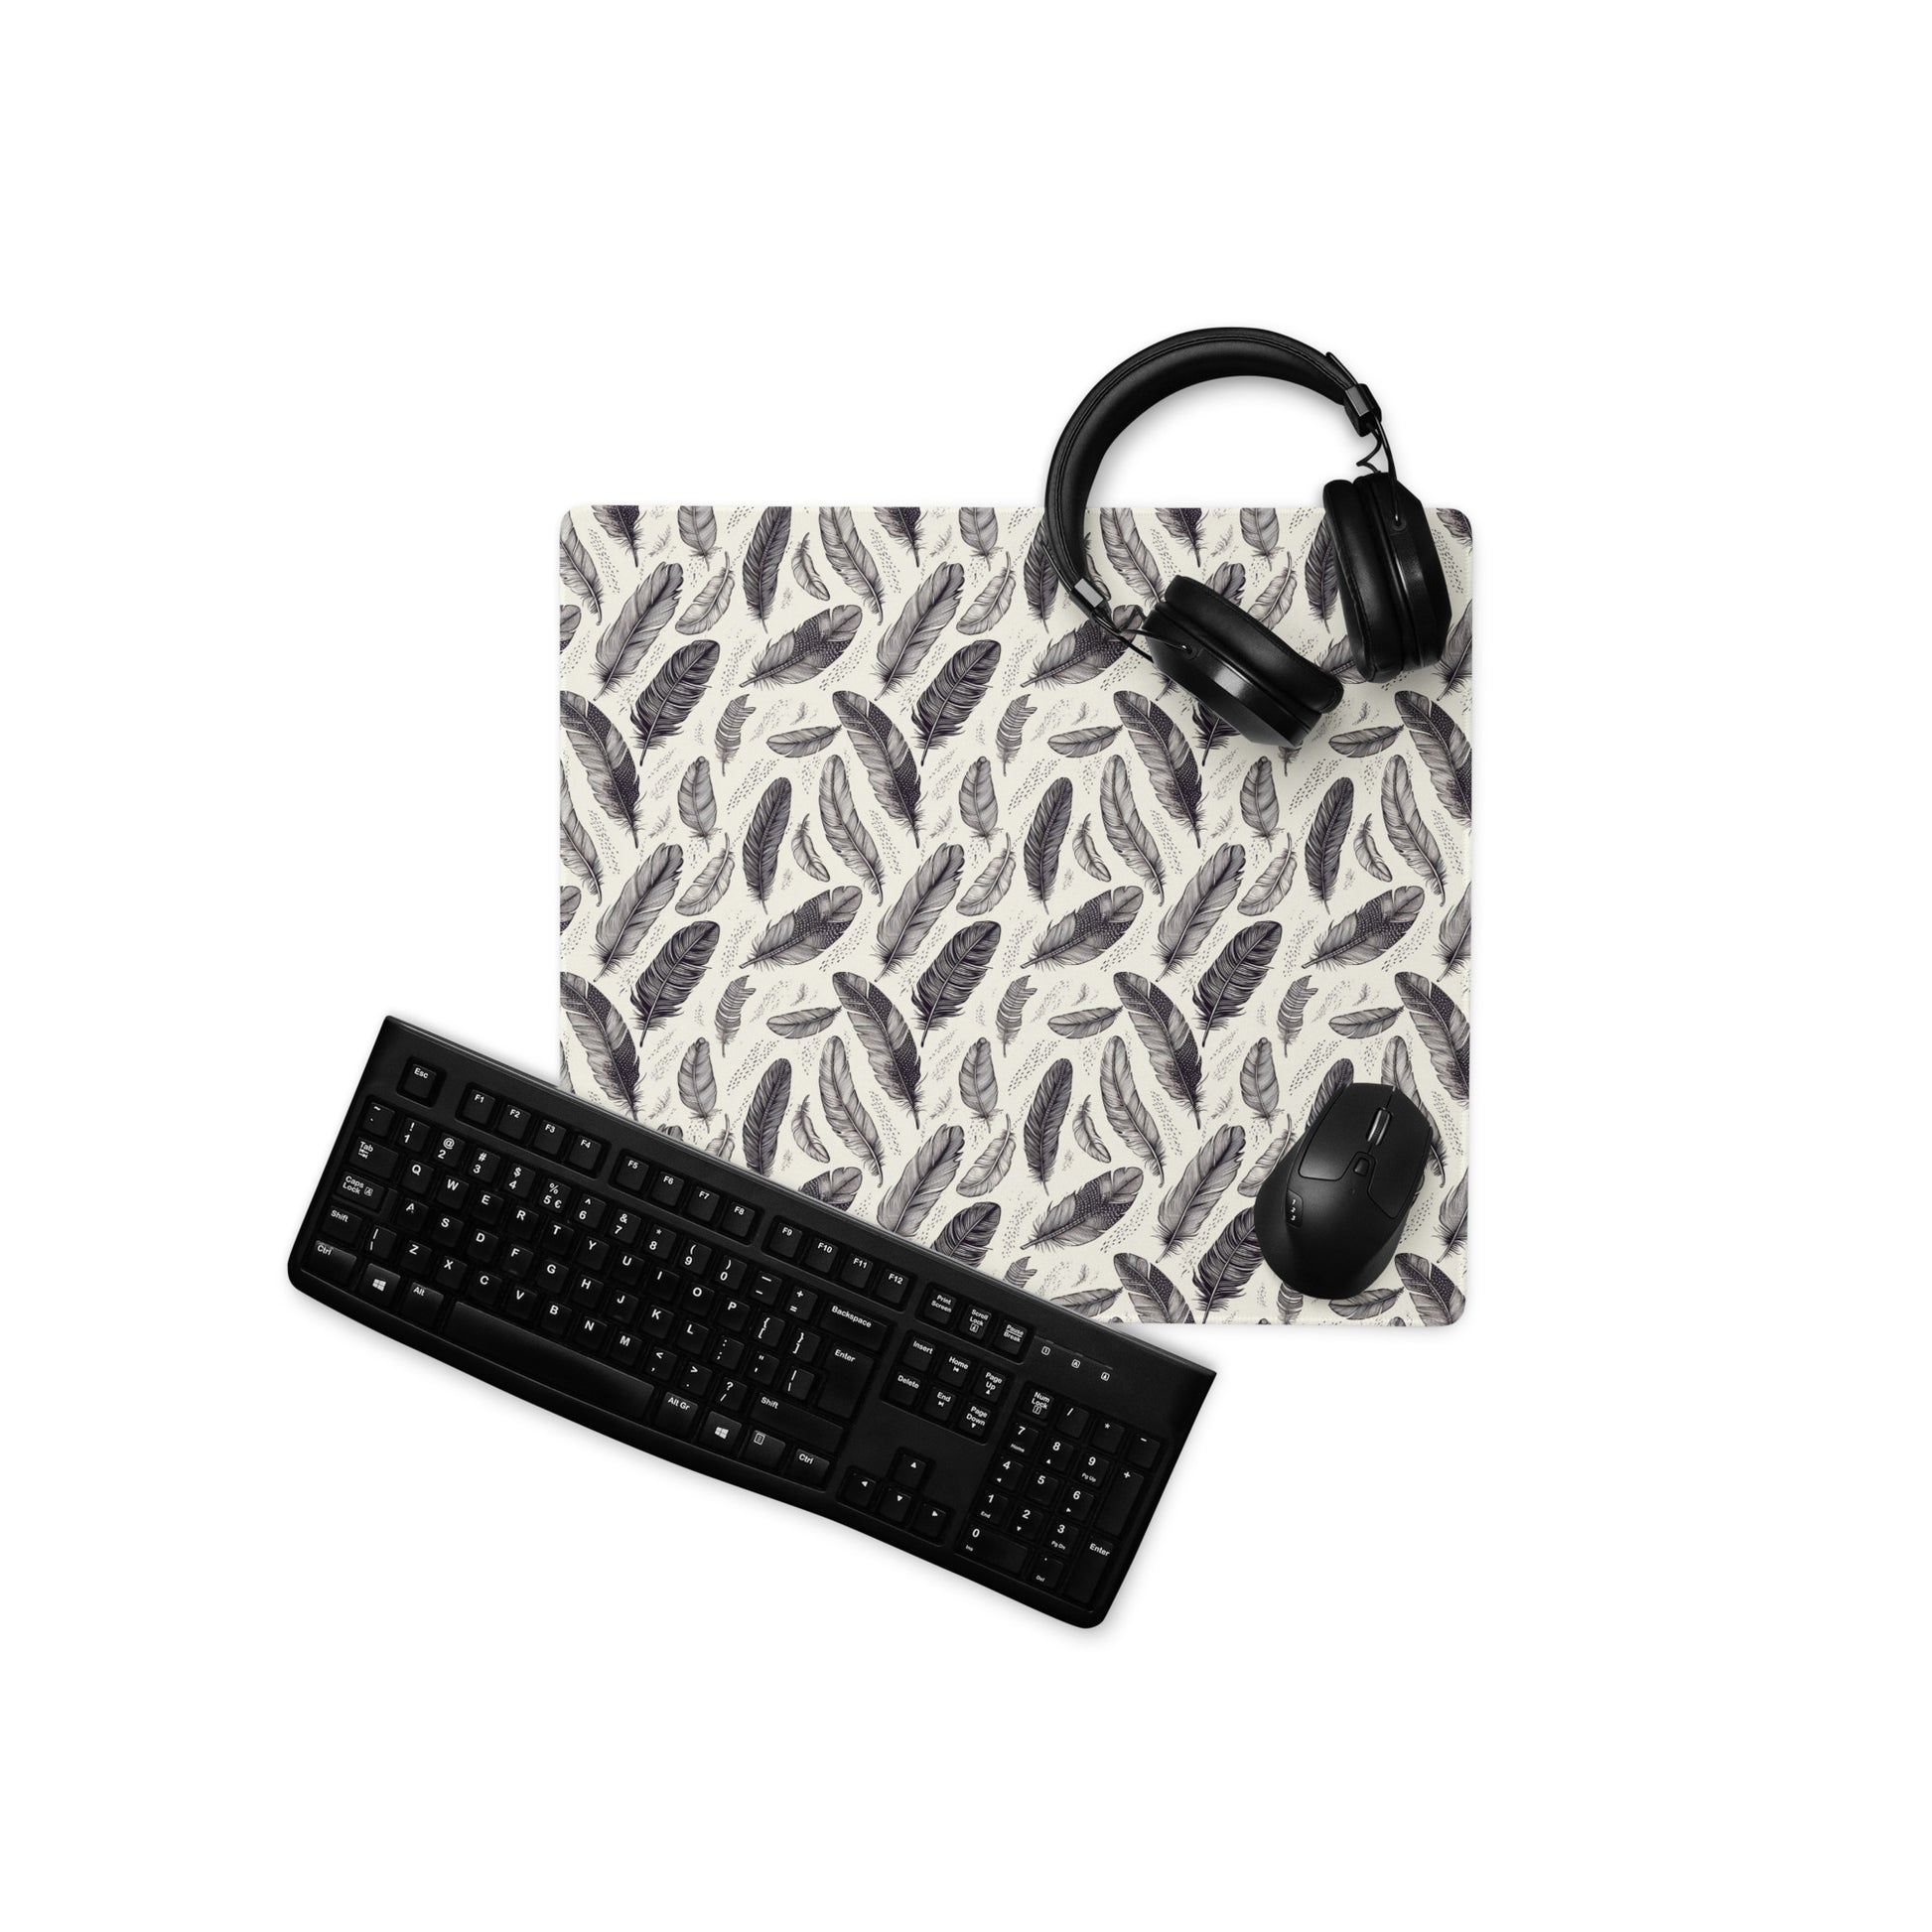 An 18" x 16" gaming desk pad with black and white feathers. A keyboard, mouse, and headphones sit on it.